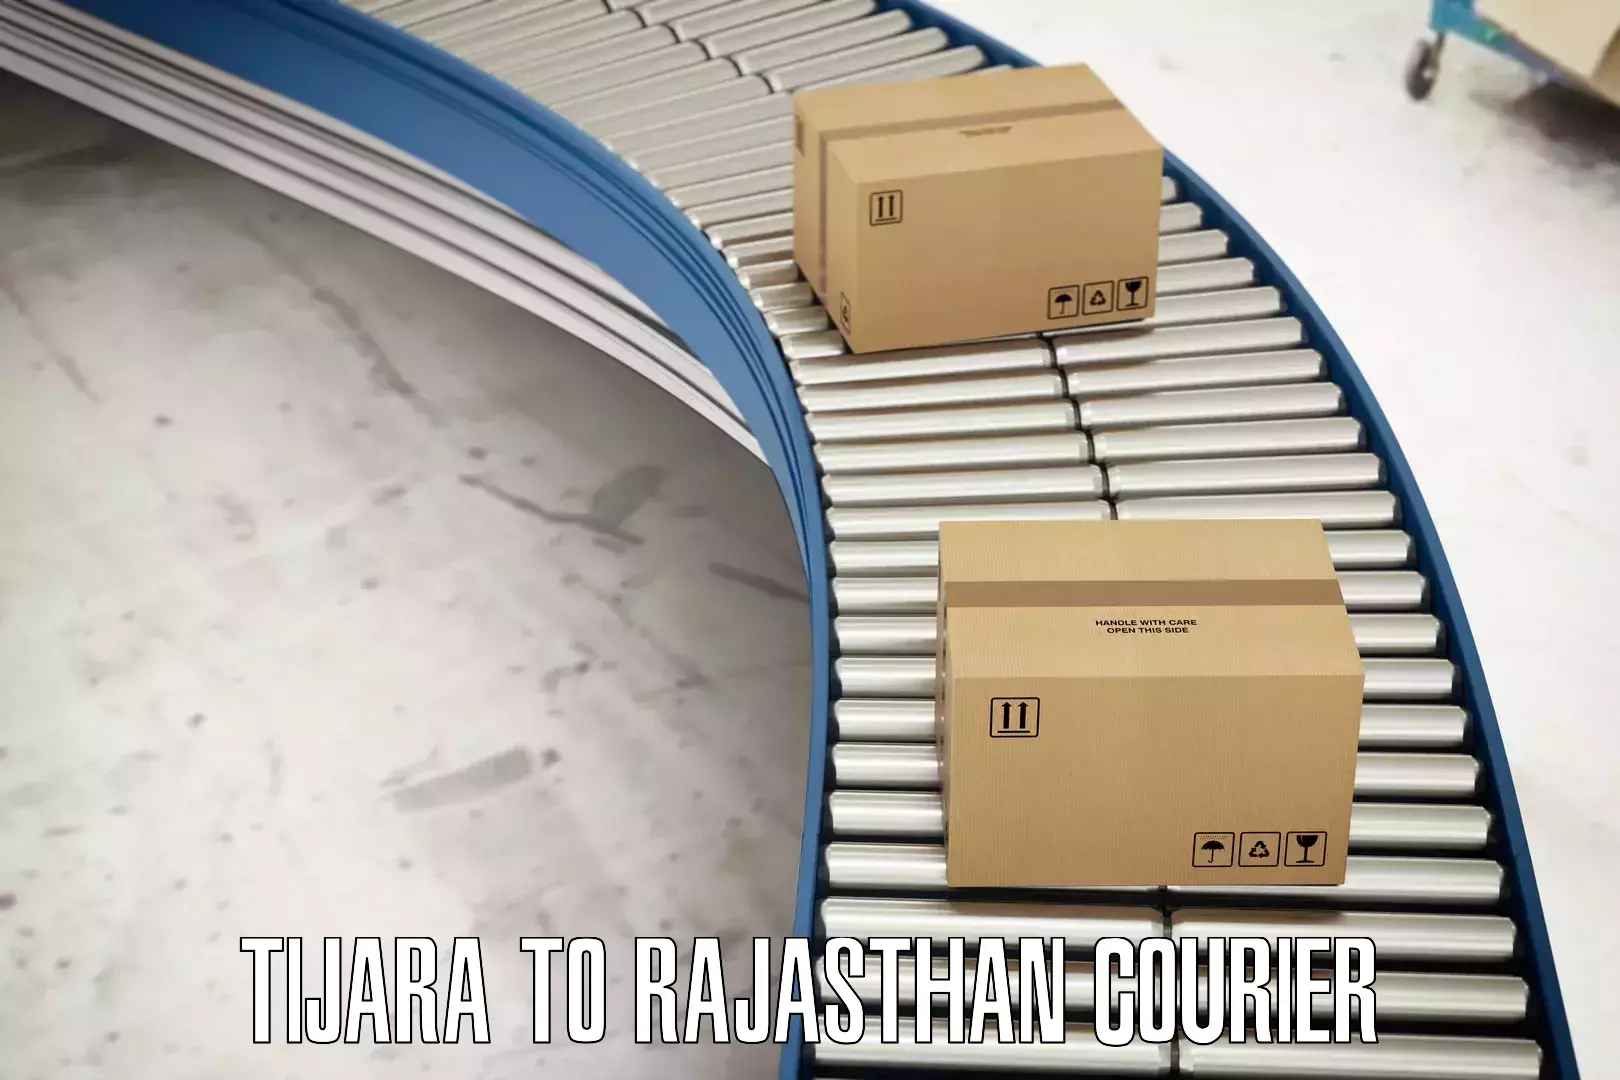 Expedited parcel delivery in Tijara to Rajasthan